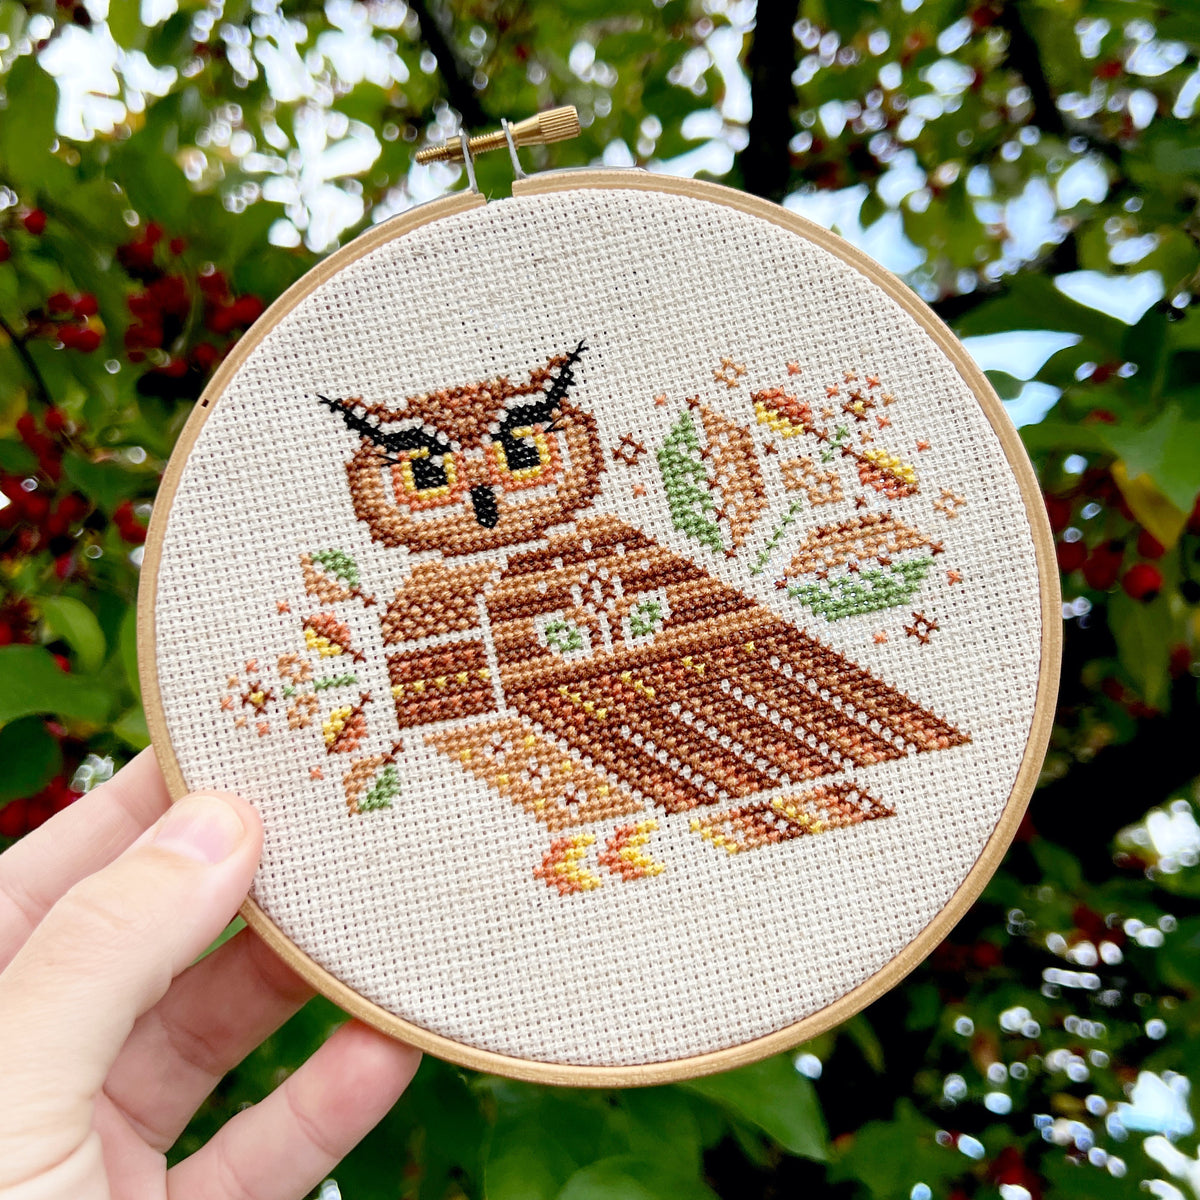 Owl Cross Stitch Kit Easy Counted Cross Stitch Kits for Beginners